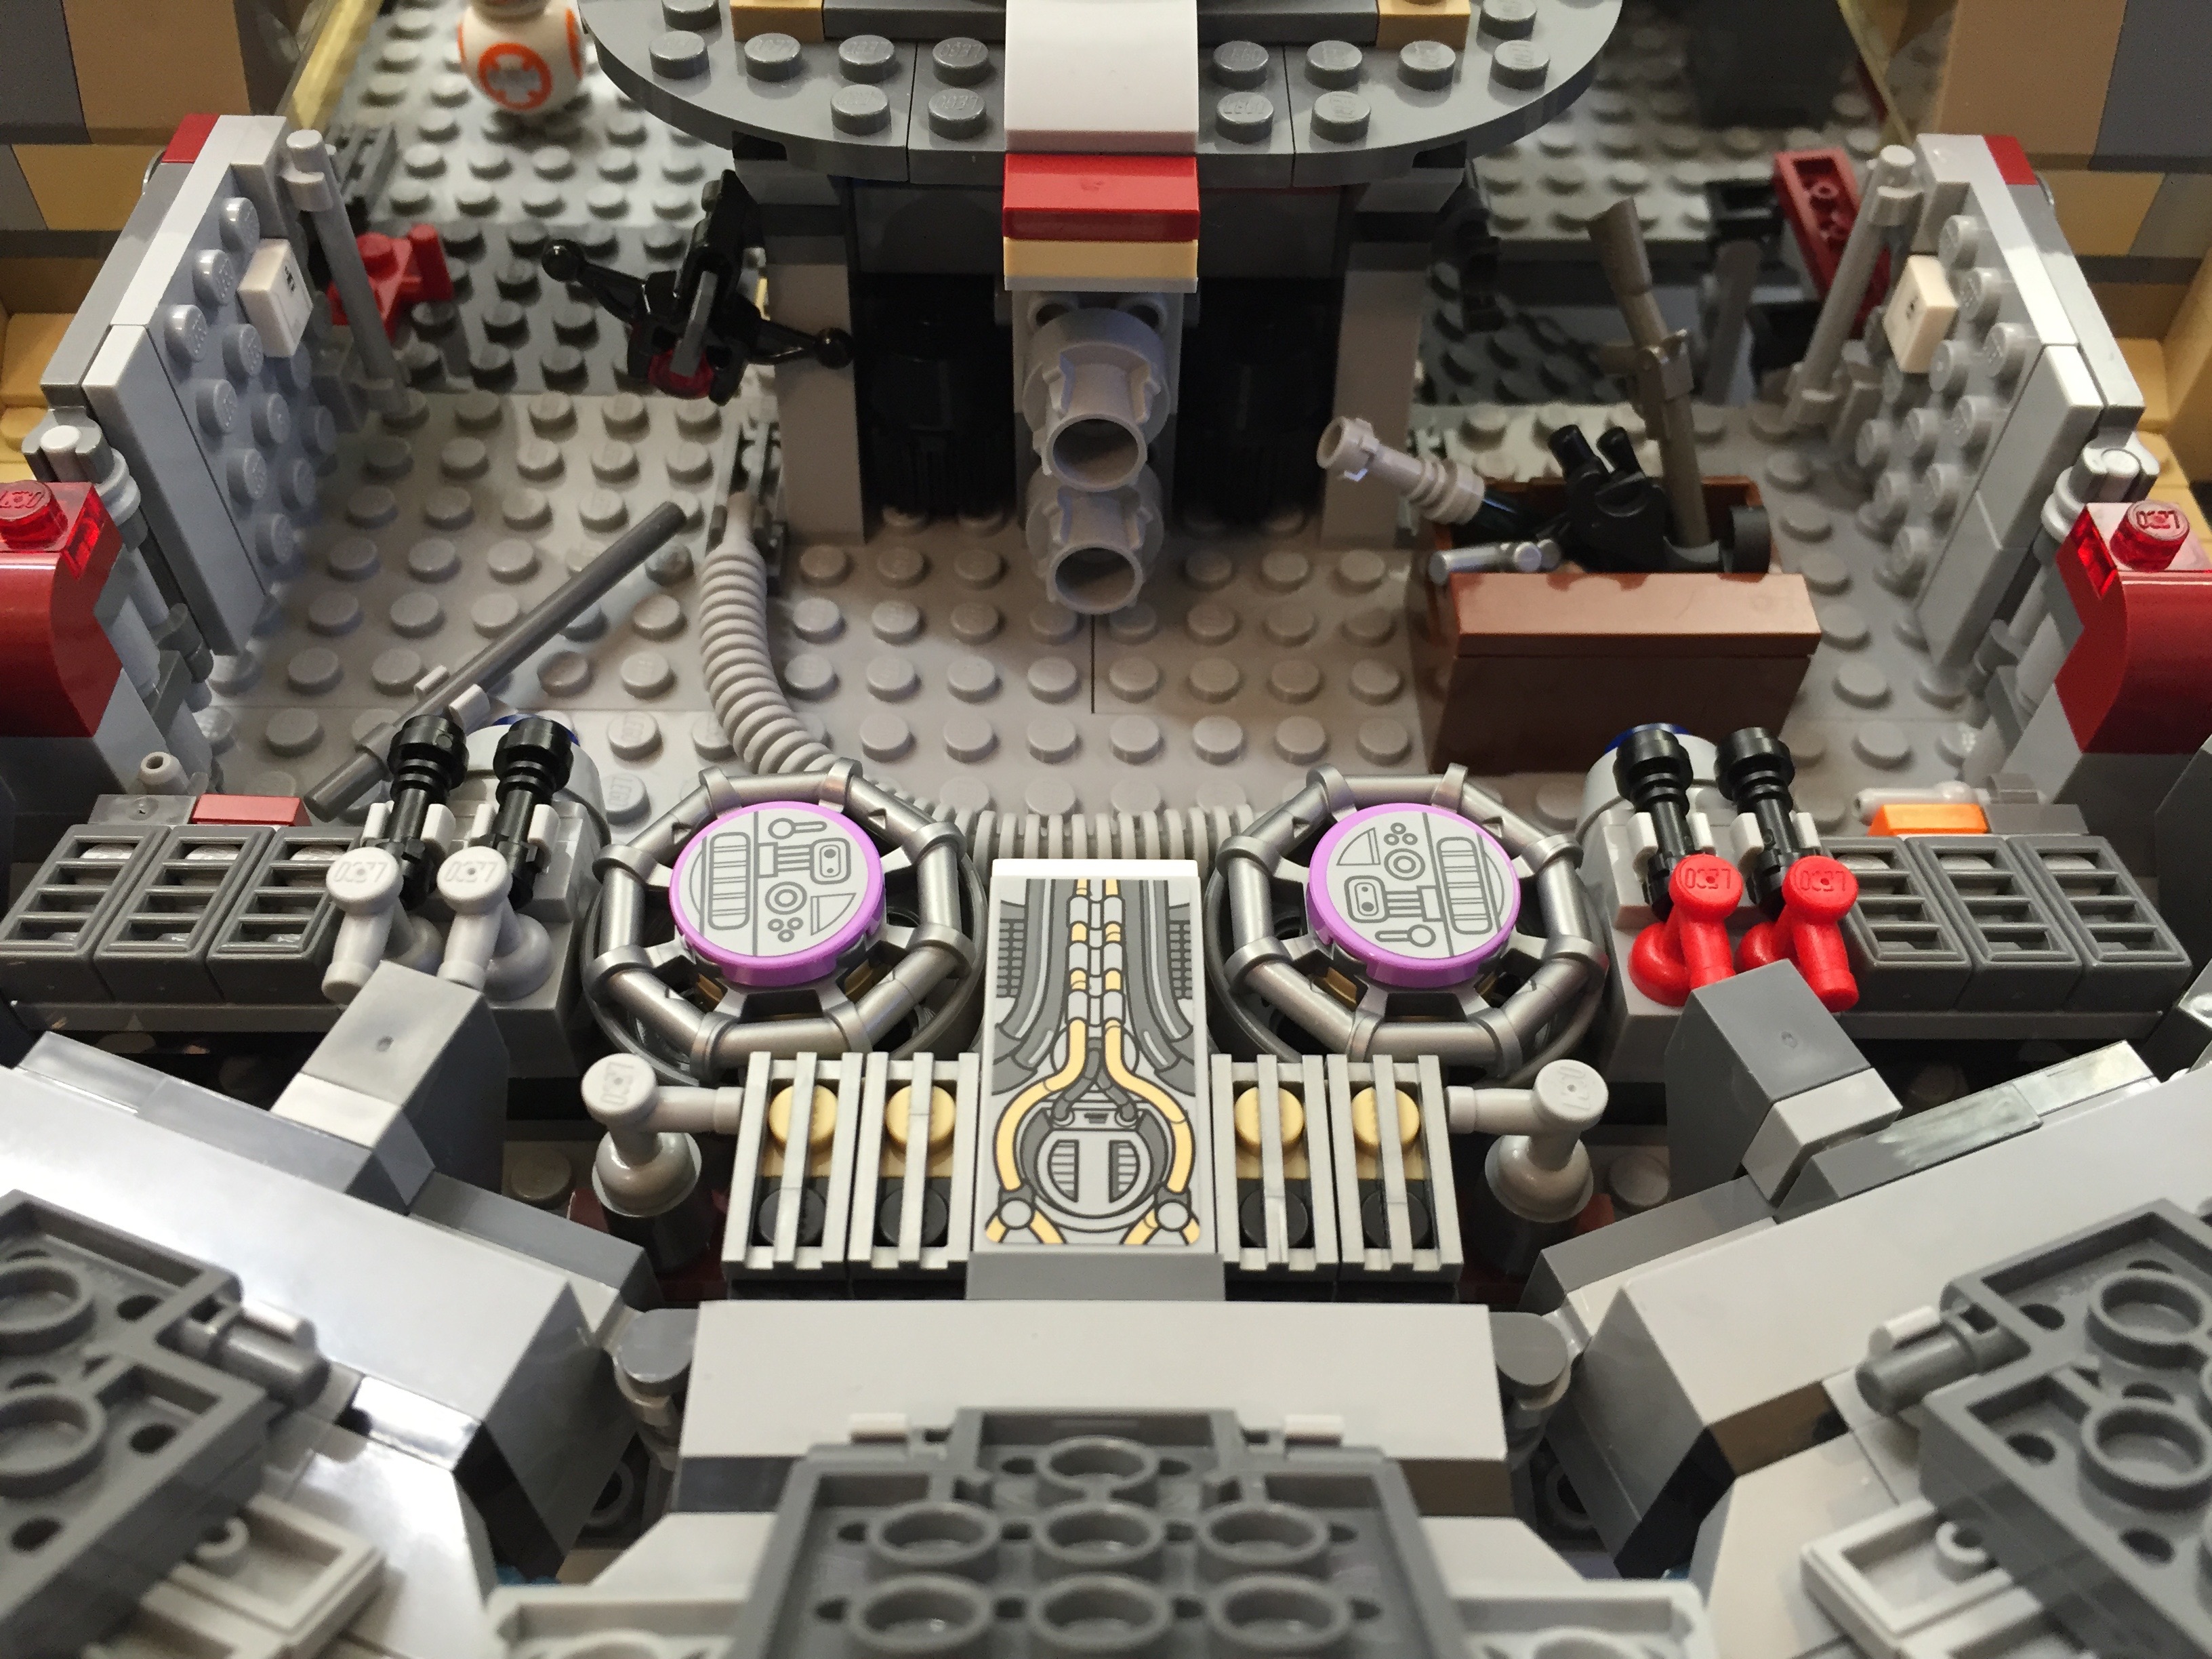 download lego millennium falcon force awakens for free